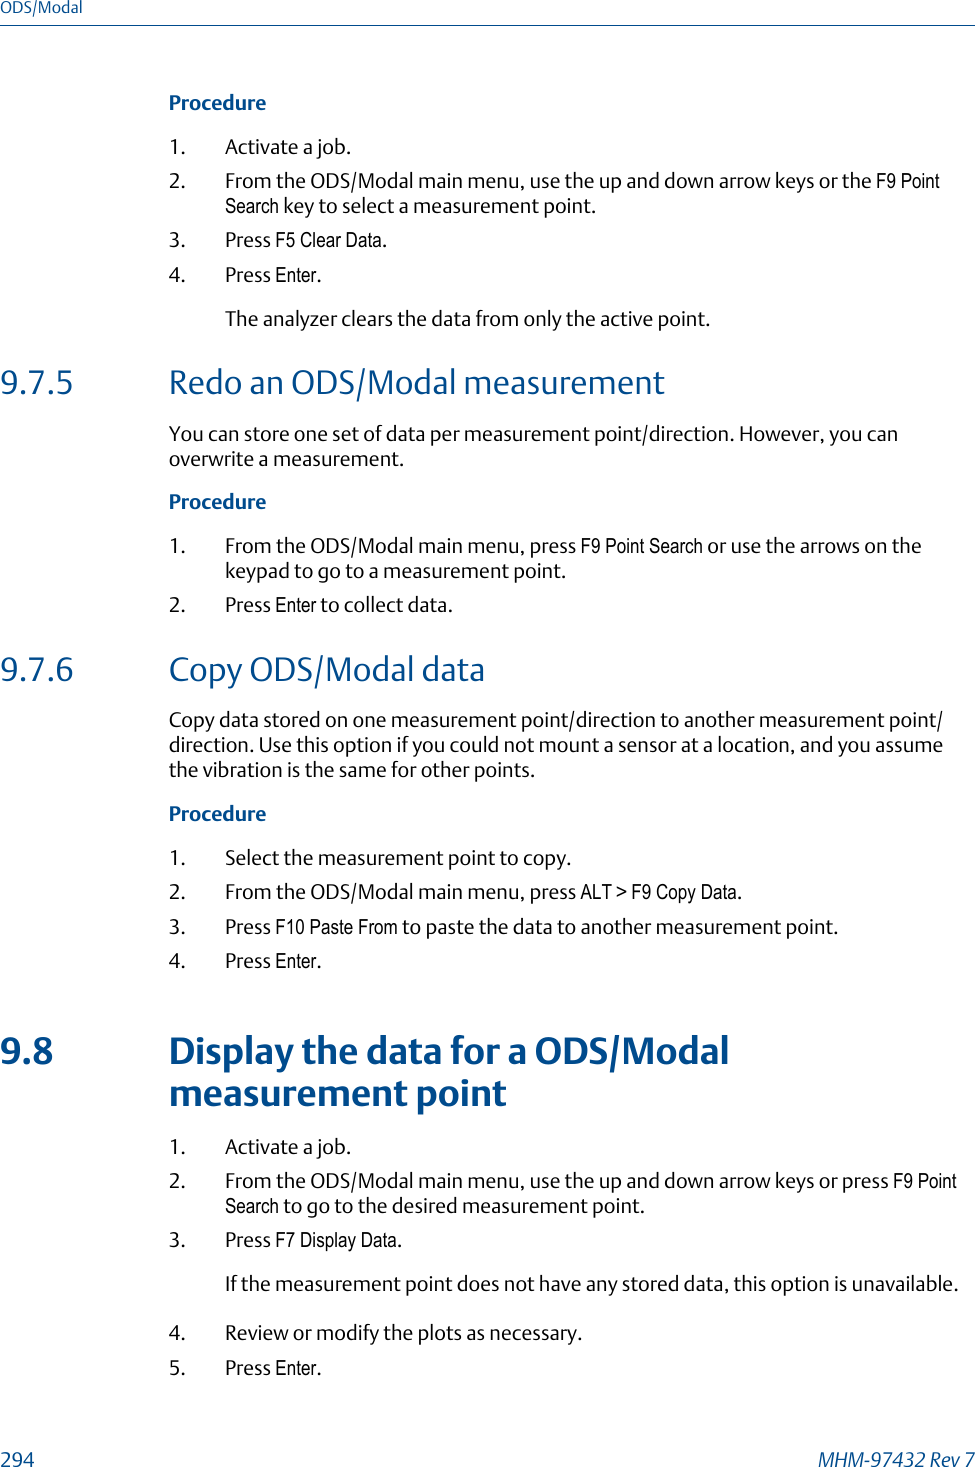 Procedure1. Activate a job.2. From the ODS/Modal main menu, use the up and down arrow keys or the F9 PointSearch key to select a measurement point.3. Press F5 Clear Data.4. Press Enter.The analyzer clears the data from only the active point.9.7.5 Redo an ODS/Modal measurementYou can store one set of data per measurement point/direction. However, you canoverwrite a measurement.Procedure1. From the ODS/Modal main menu, press F9 Point Search or use the arrows on thekeypad to go to a measurement point.2. Press Enter to collect data.9.7.6 Copy ODS/Modal dataCopy data stored on one measurement point/direction to another measurement point/direction. Use this option if you could not mount a sensor at a location, and you assumethe vibration is the same for other points.Procedure1. Select the measurement point to copy.2. From the ODS/Modal main menu, press ALT &gt; F9 Copy Data.3. Press F10 Paste From to paste the data to another measurement point.4. Press Enter.9.8 Display the data for a ODS/Modalmeasurement point1. Activate a job.2. From the ODS/Modal main menu, use the up and down arrow keys or press F9 PointSearch to go to the desired measurement point.3. Press F7 Display Data.If the measurement point does not have any stored data, this option is unavailable.4. Review or modify the plots as necessary.5. Press Enter.ODS/Modal294 MHM-97432 Rev 7